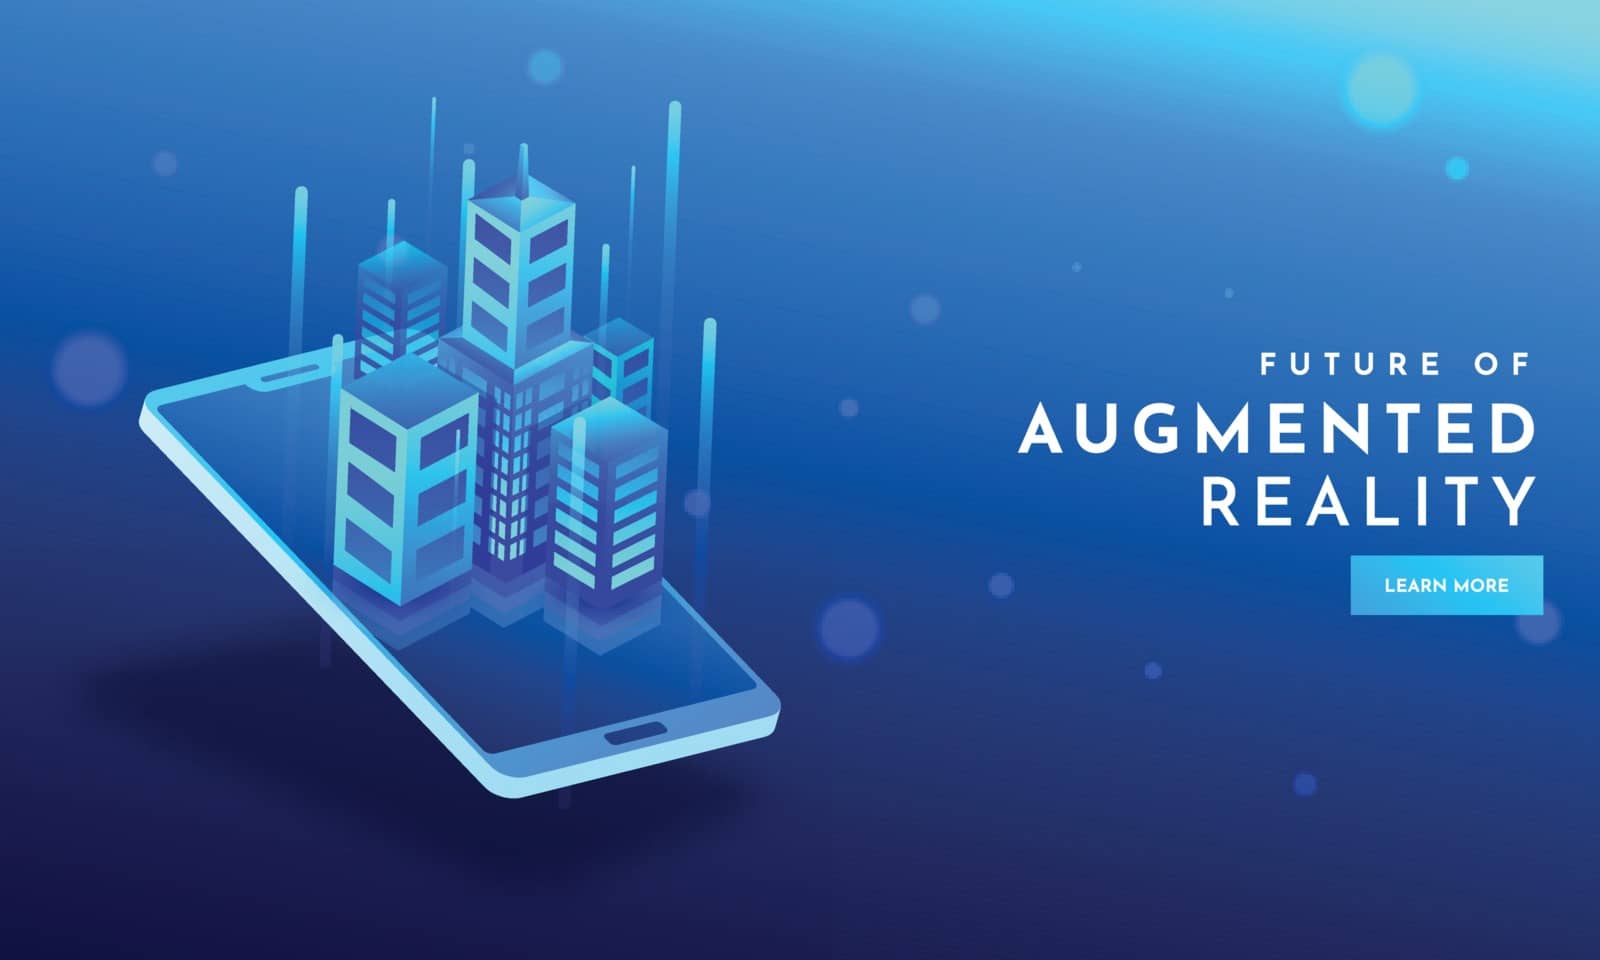 Skyscrapers illustration on smartphone screen with abstract elements on shiny blue background for Augmented Reality (AR) concept based responsive web template.